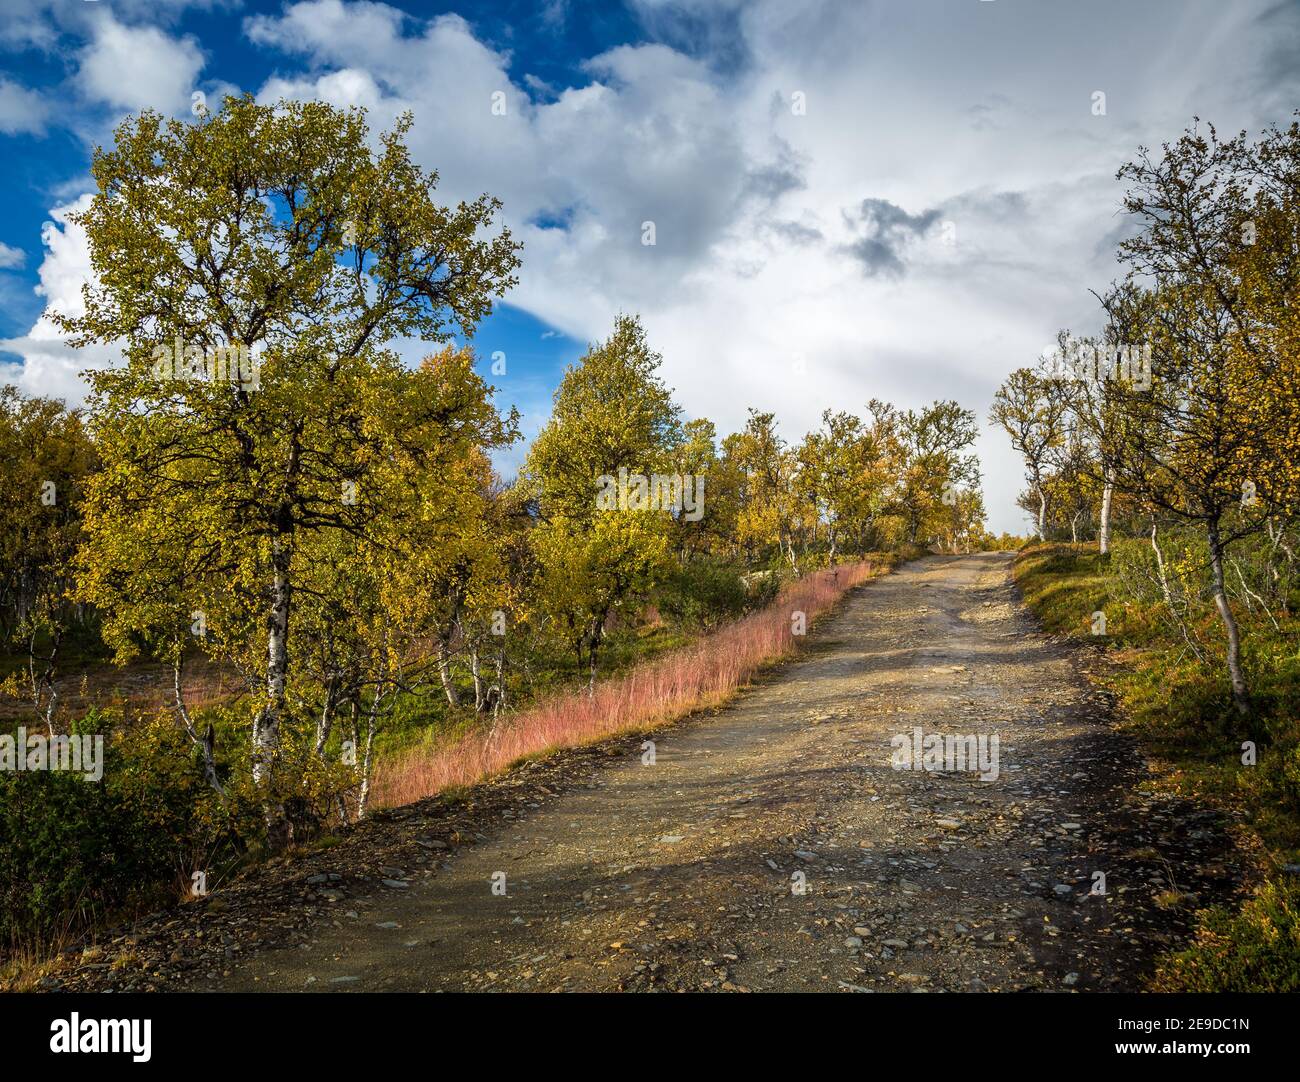 Autumn in norwegian mountains. Beautiful woodland area near Gruvefeltet mining grounds. Path through autumnal birch forest. Norway. Stock Photo